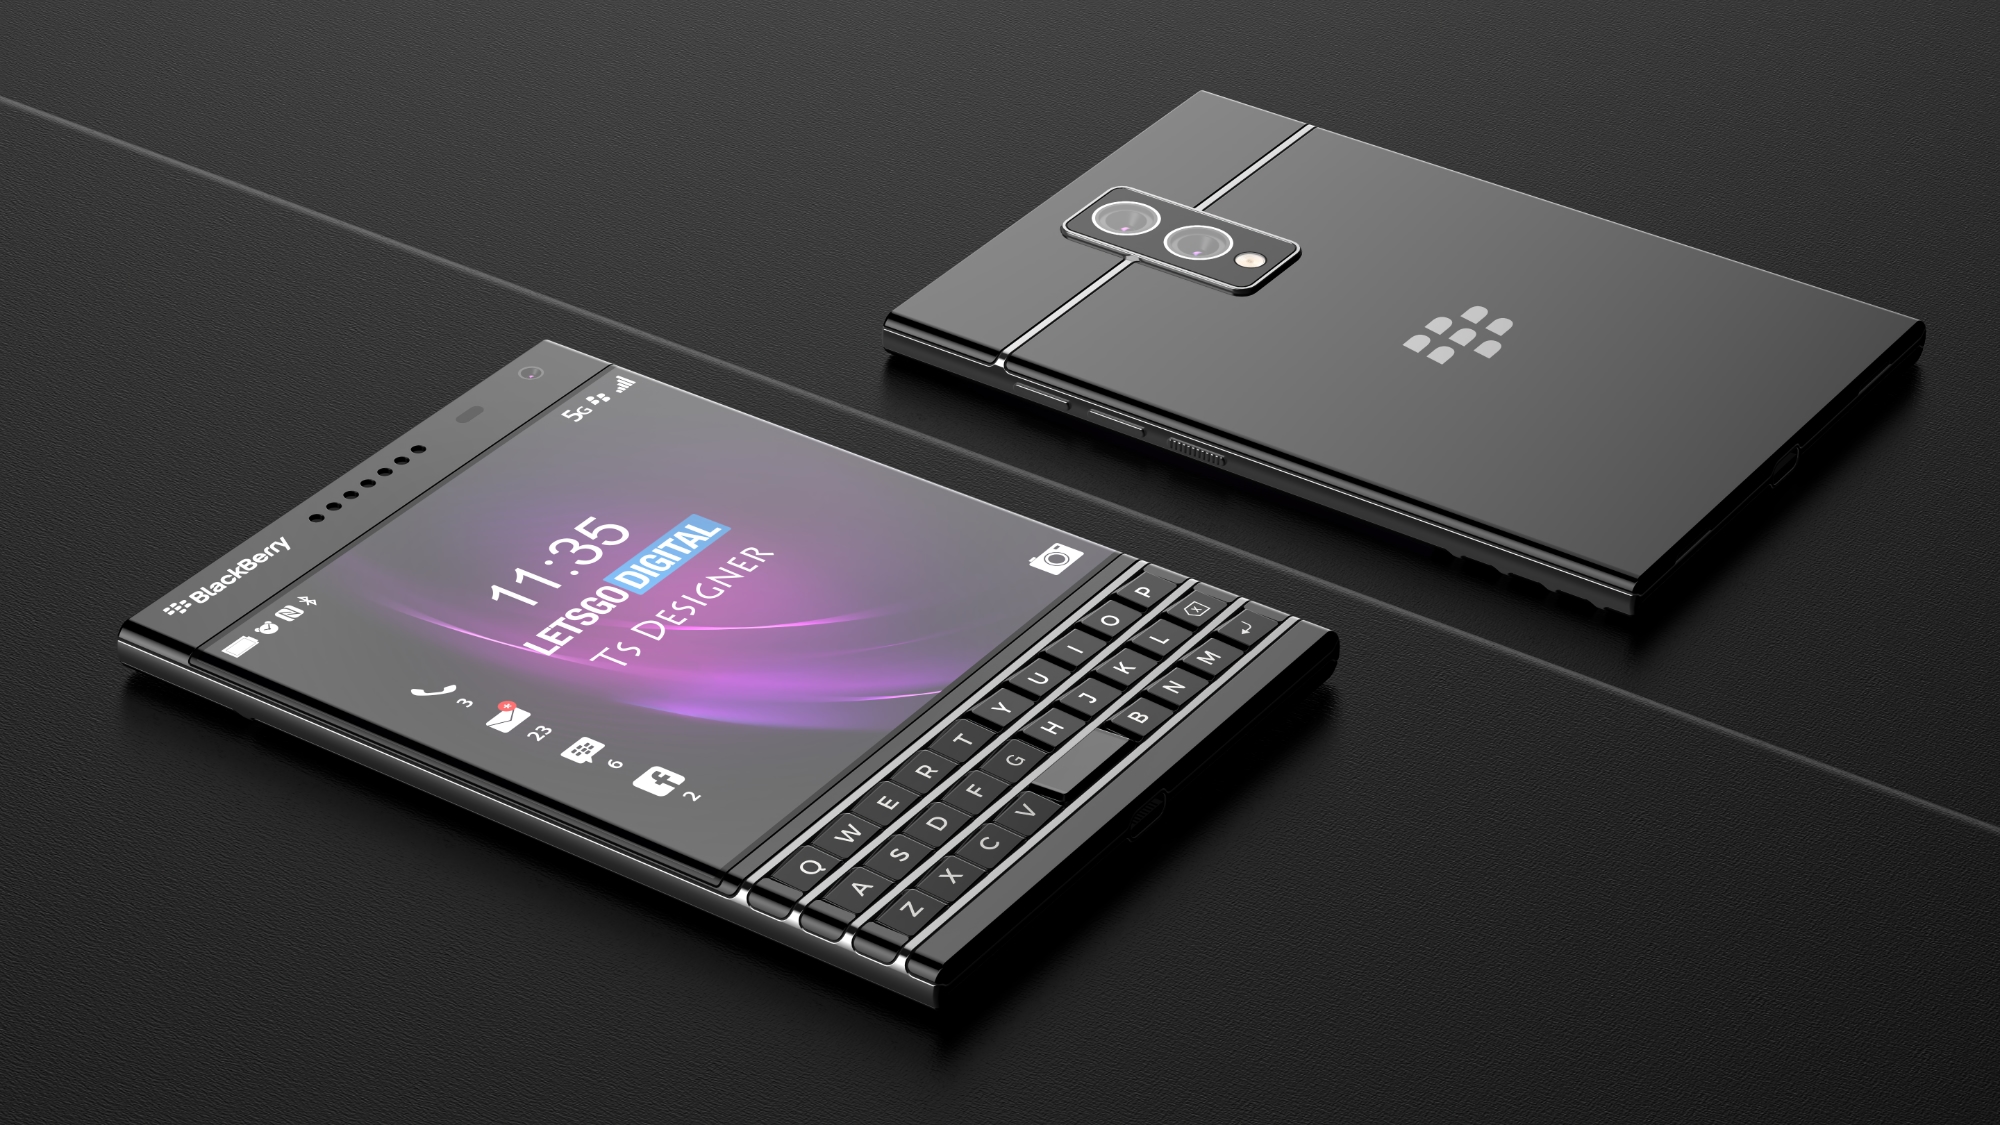 BlackBerry is to release a with a physical QWERTY keyboard, here's how it might look | gagadget.com